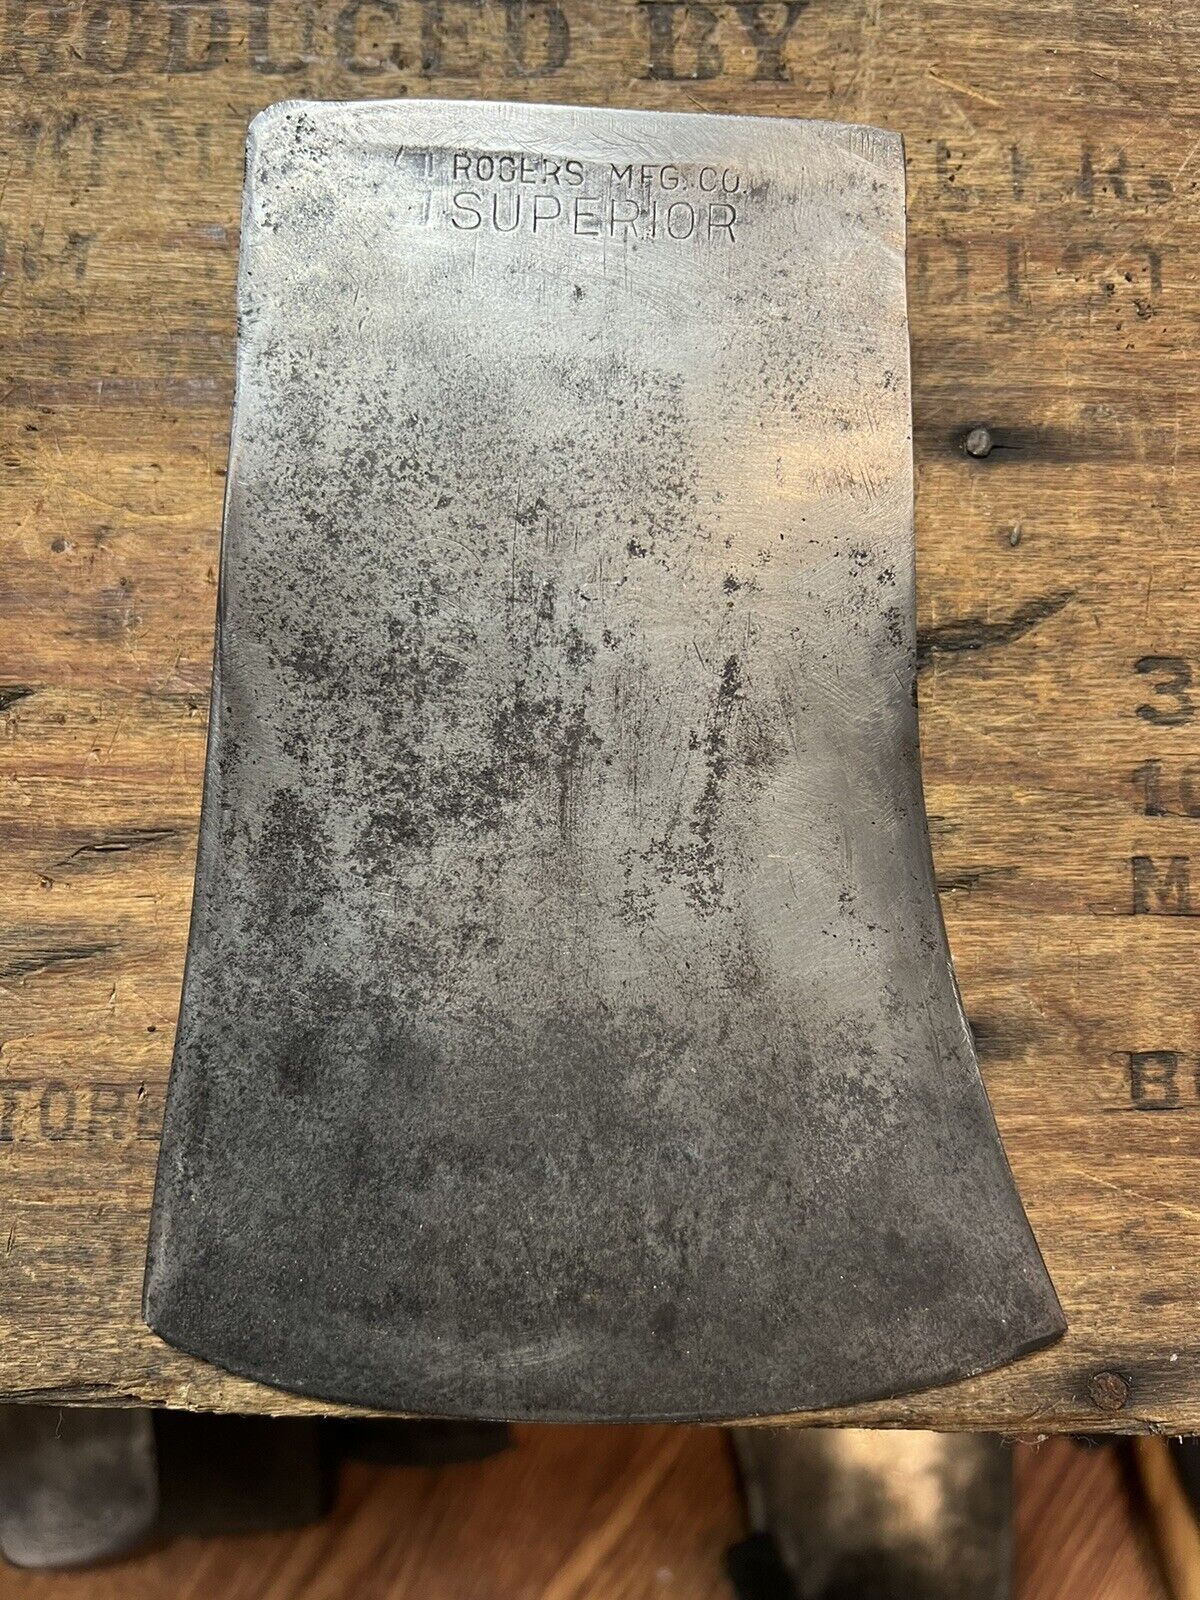 Vintage “Connie” Rogers Mfg “Connecticut” pattern axe